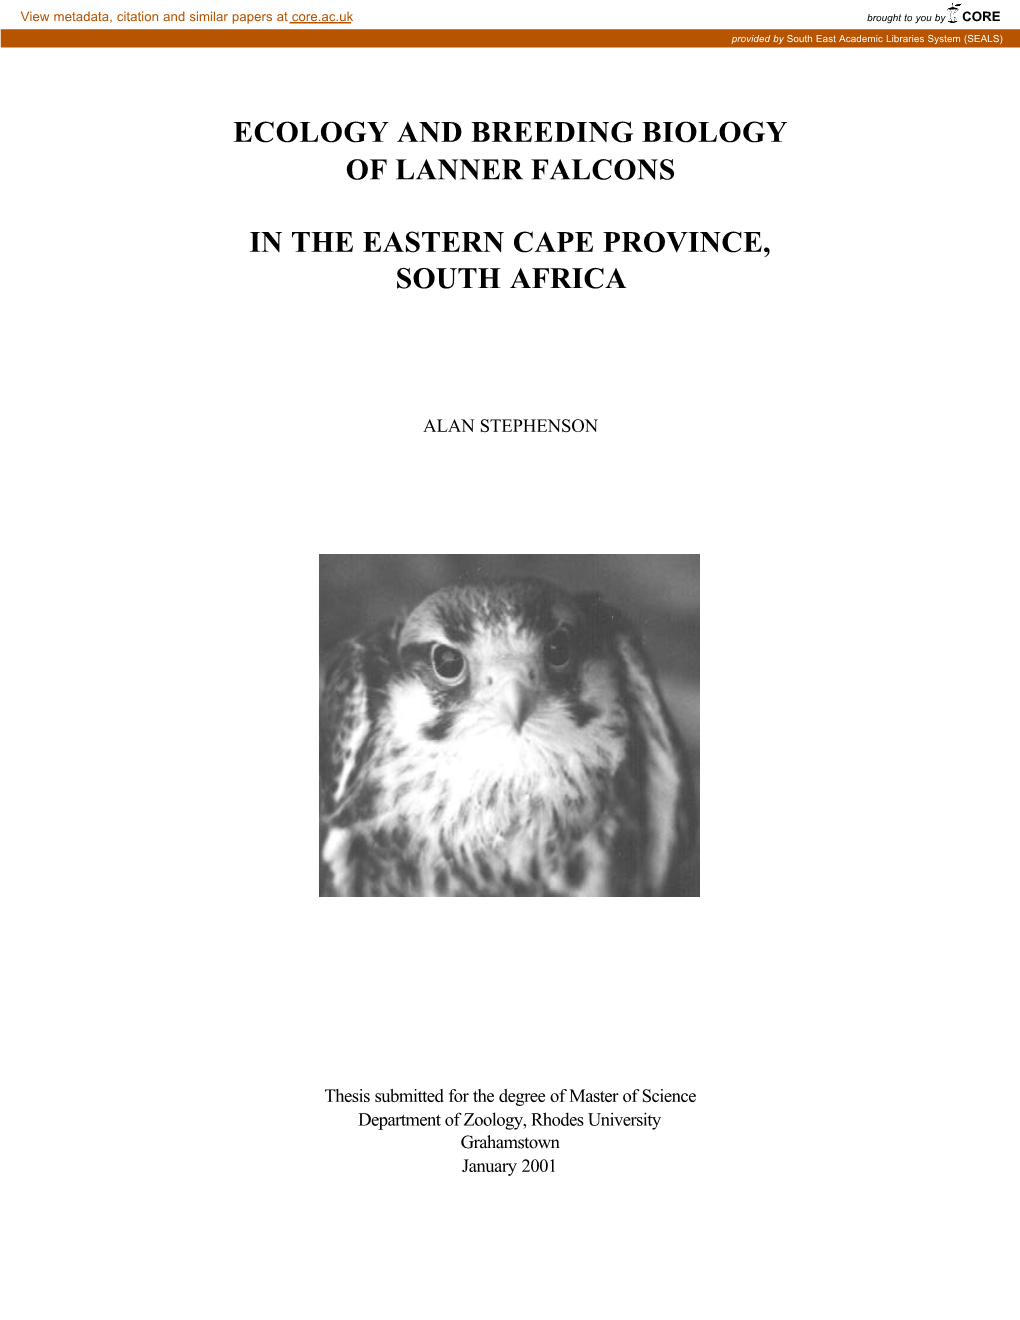 Ecology and Breeding Biology of Lanner Falcons